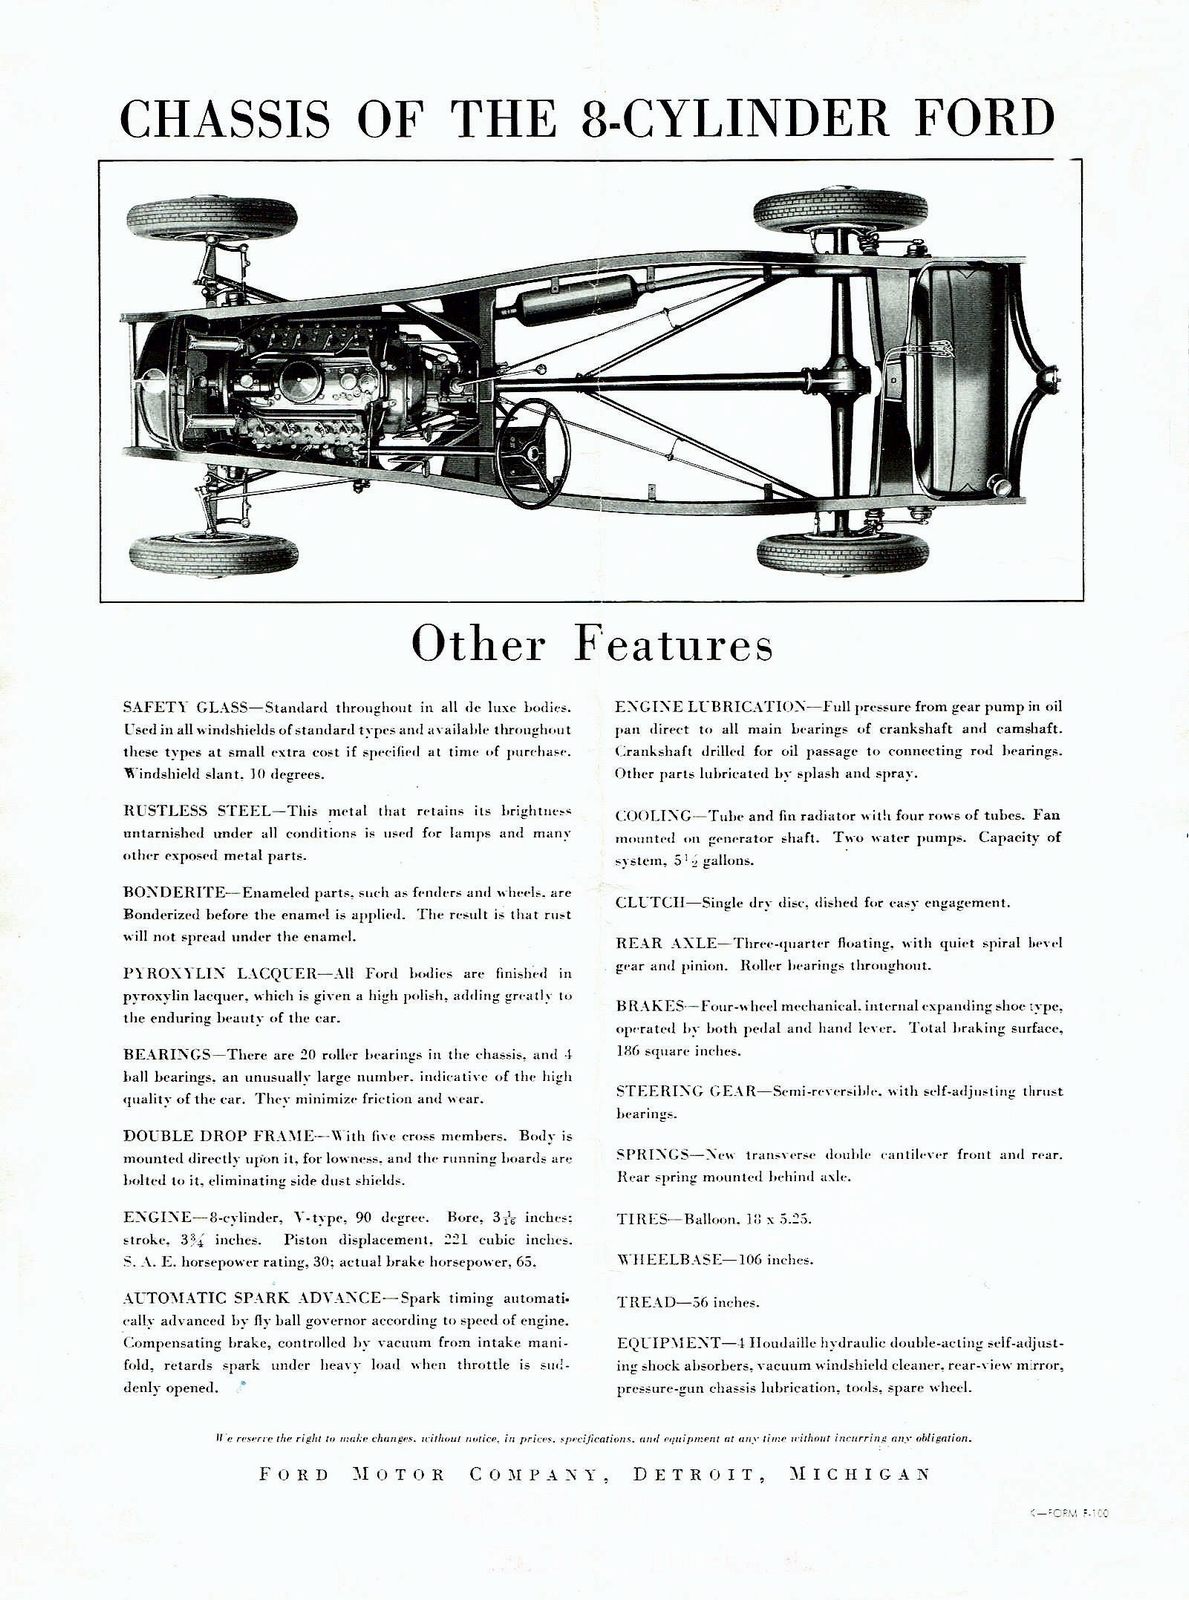 n_1932 Ford V-8 Features Foldout-04.jpg